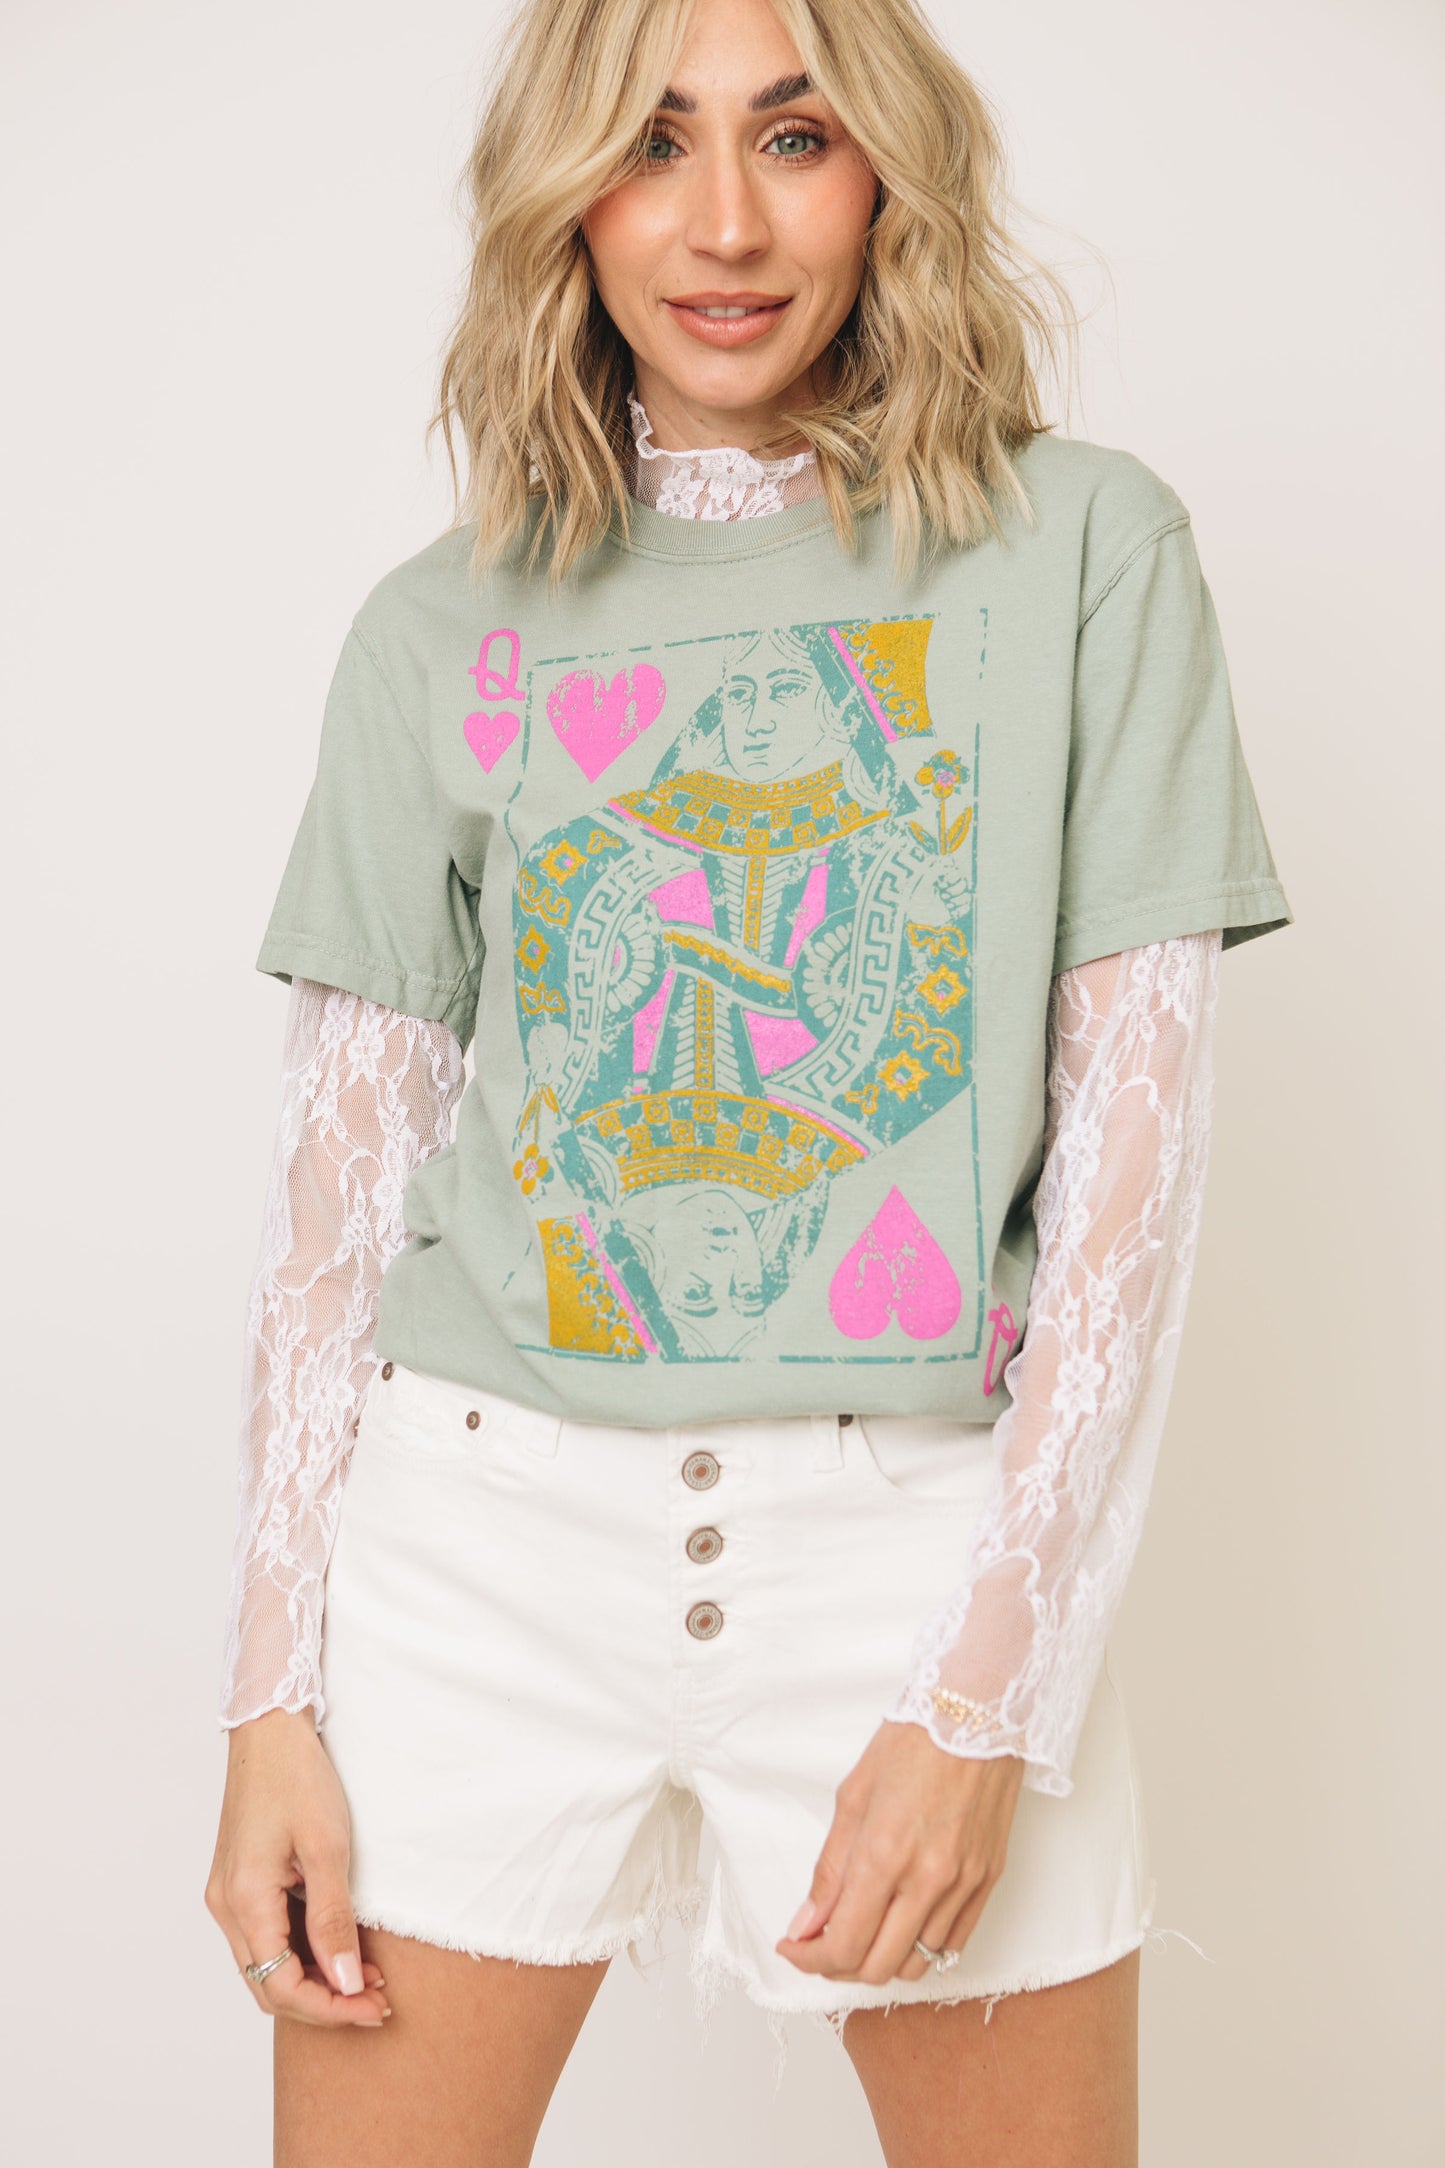 RESTOCKED - Floral Print Lace Long Sleeves Top  (S-3XL)